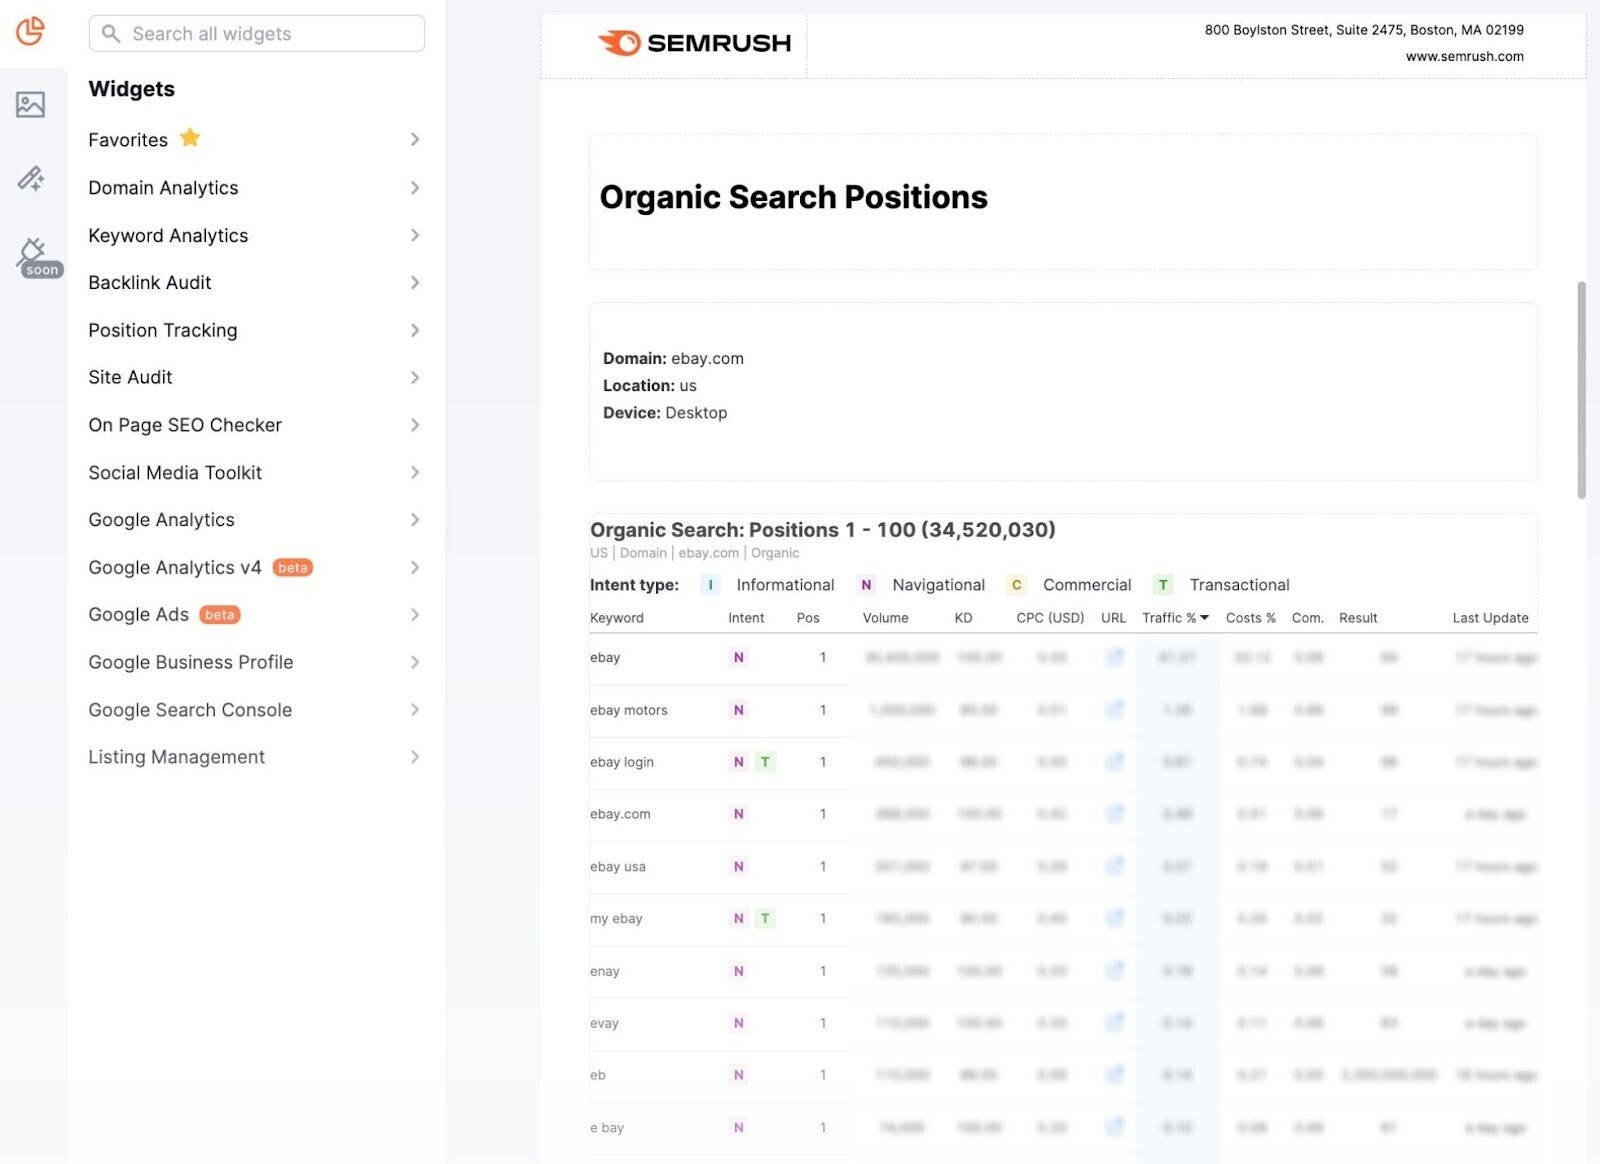 Organic Search Positions report